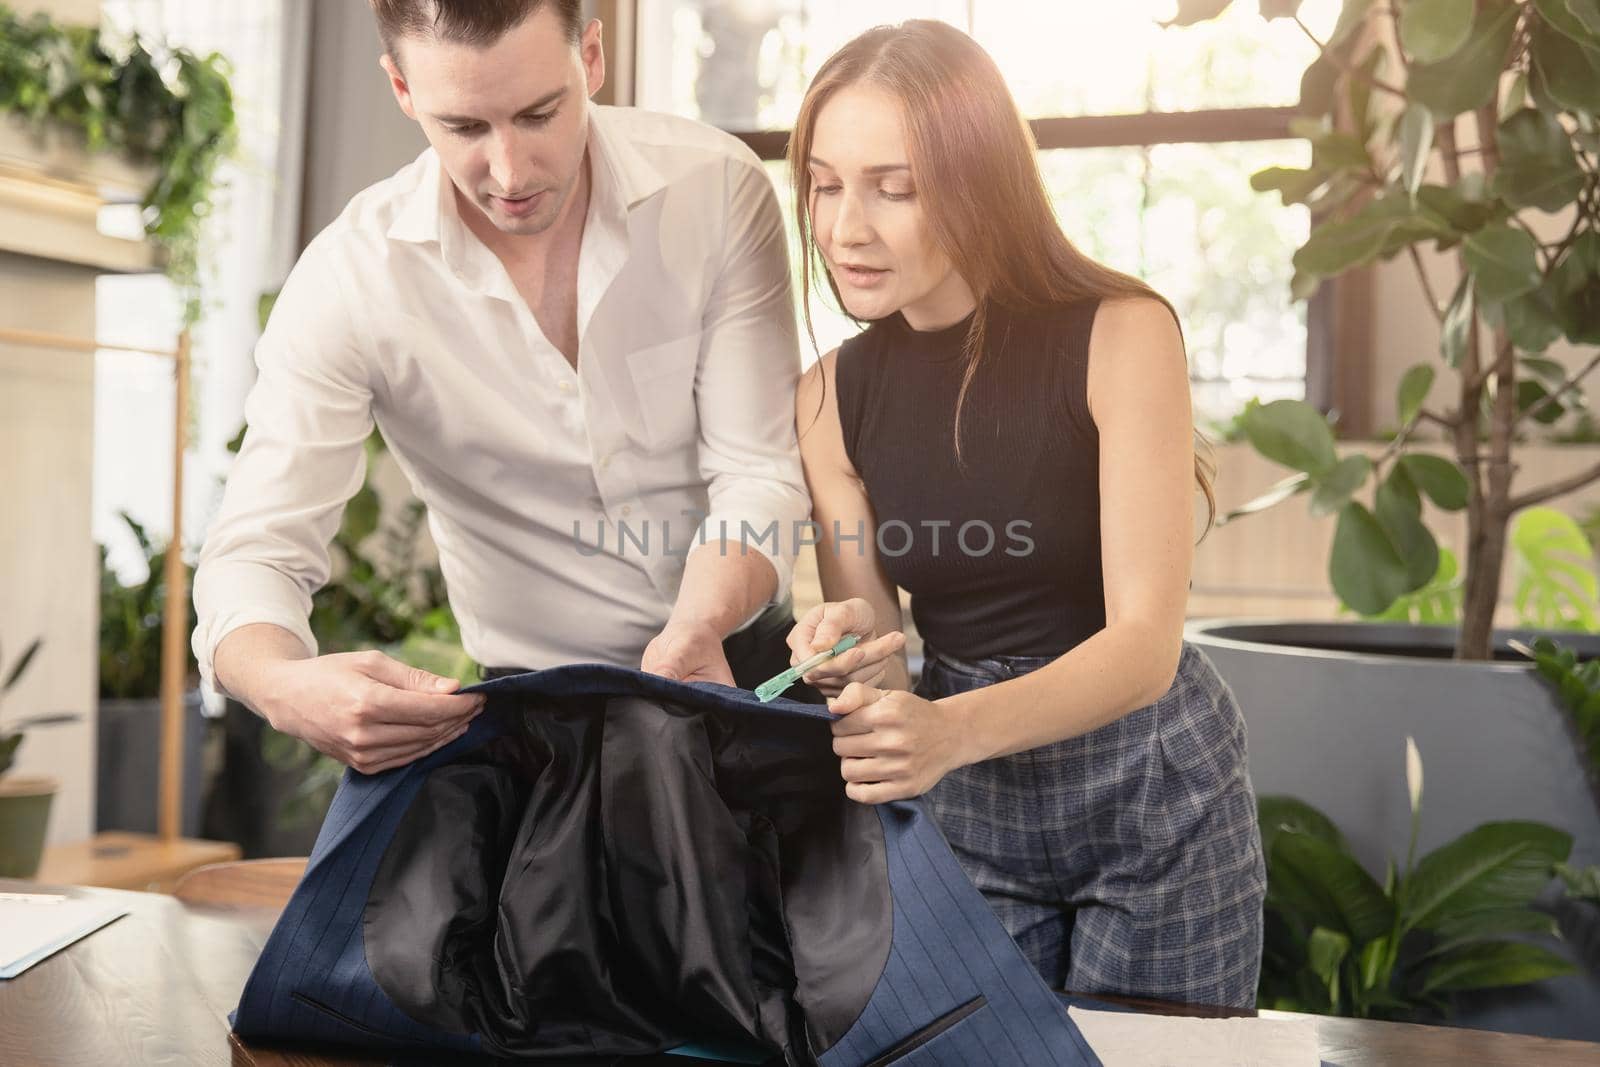 Men clothing designer, Working women co-working with man to design suit in tailor shop